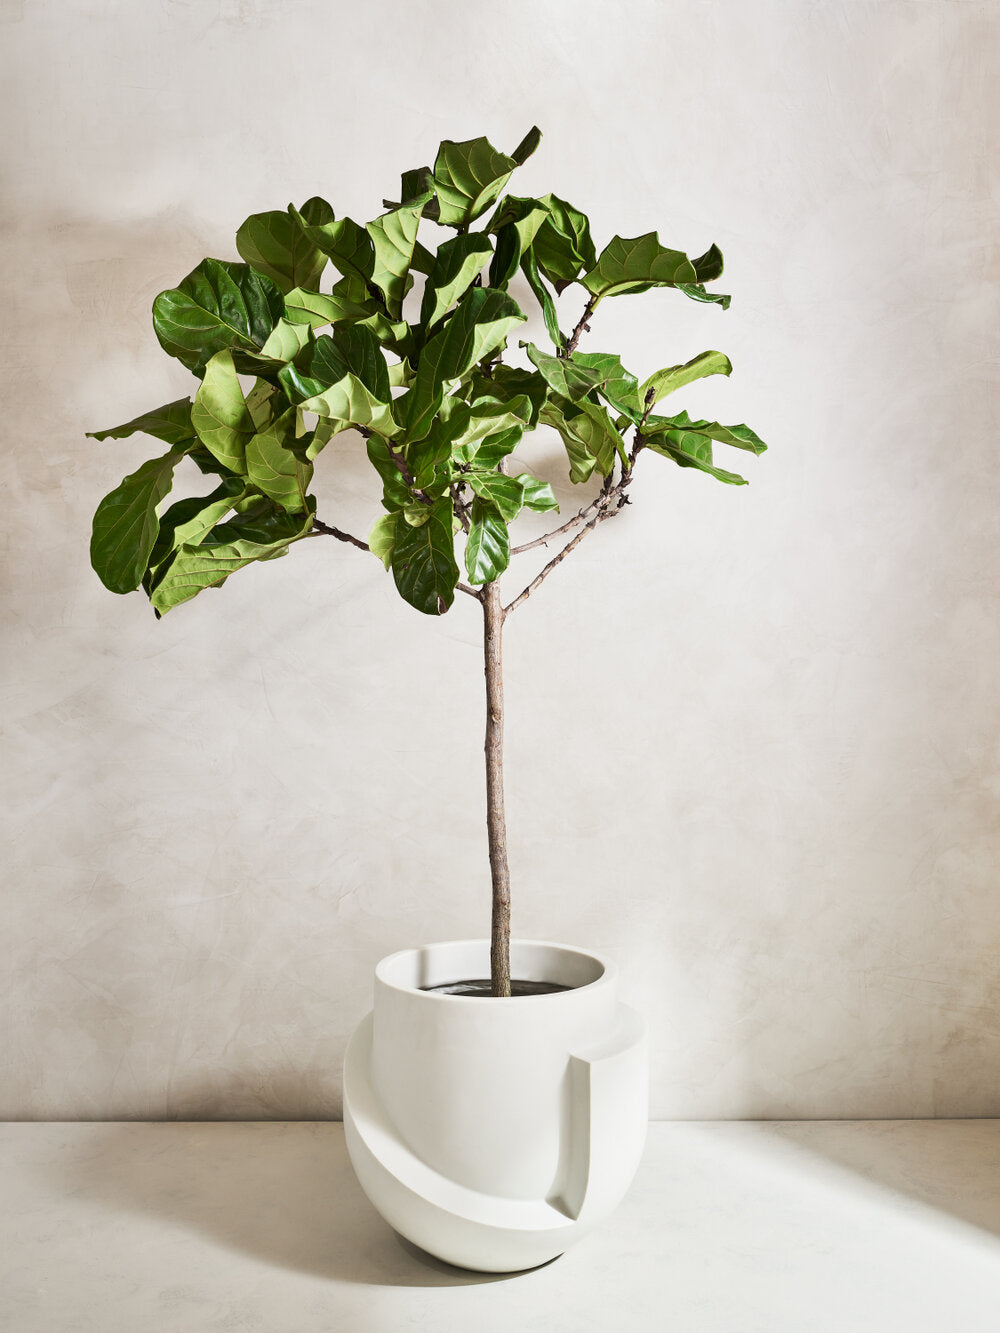 Extra large bonded carrara marble floor planter with fiddle leaf fig tree